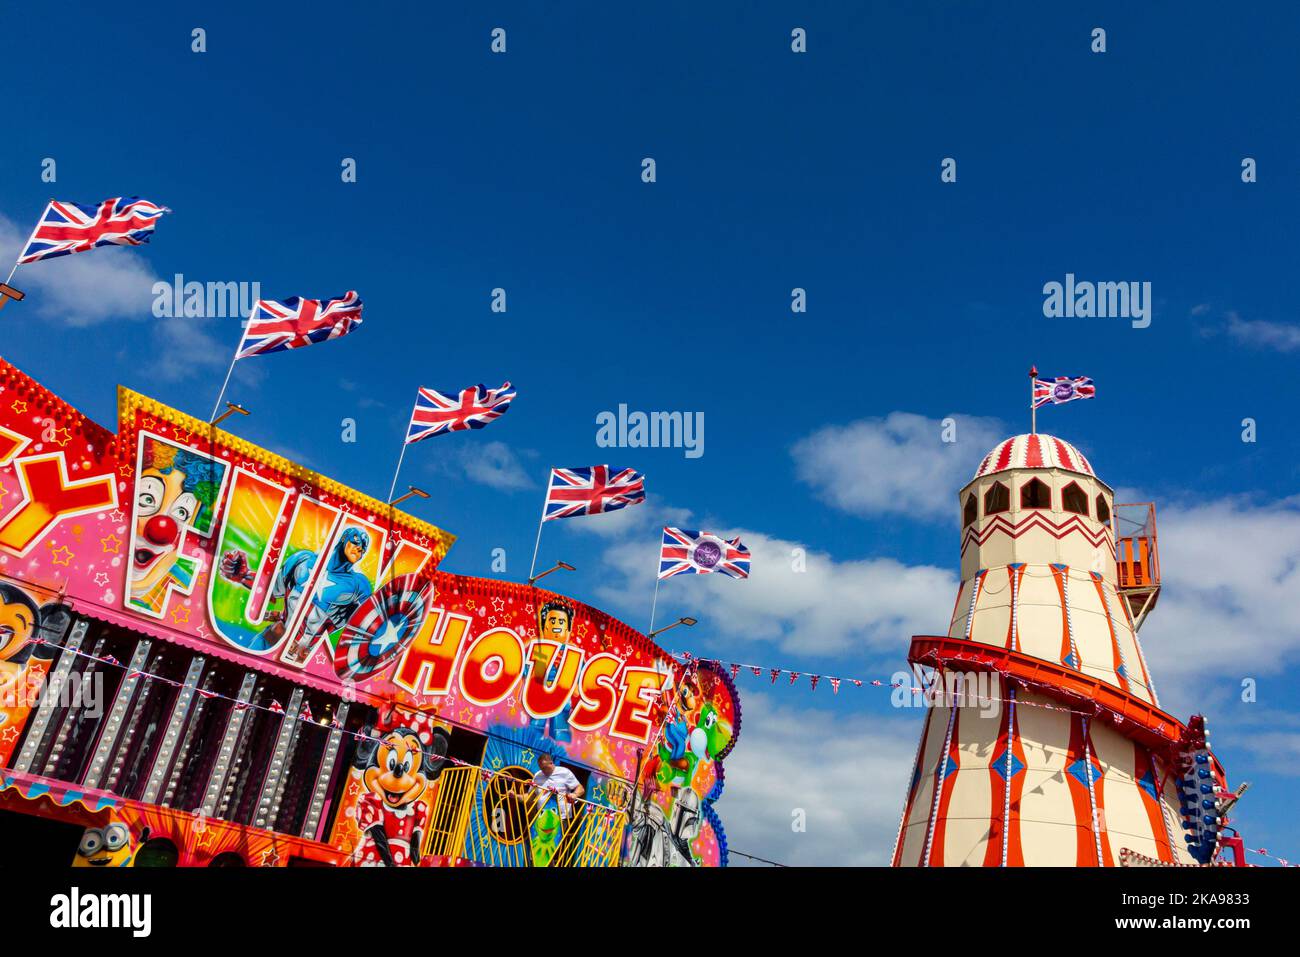 Traditional funfair rides at a fairground near Hunstanton beach in west Norfolk on the east coast of England UK. Stock Photo